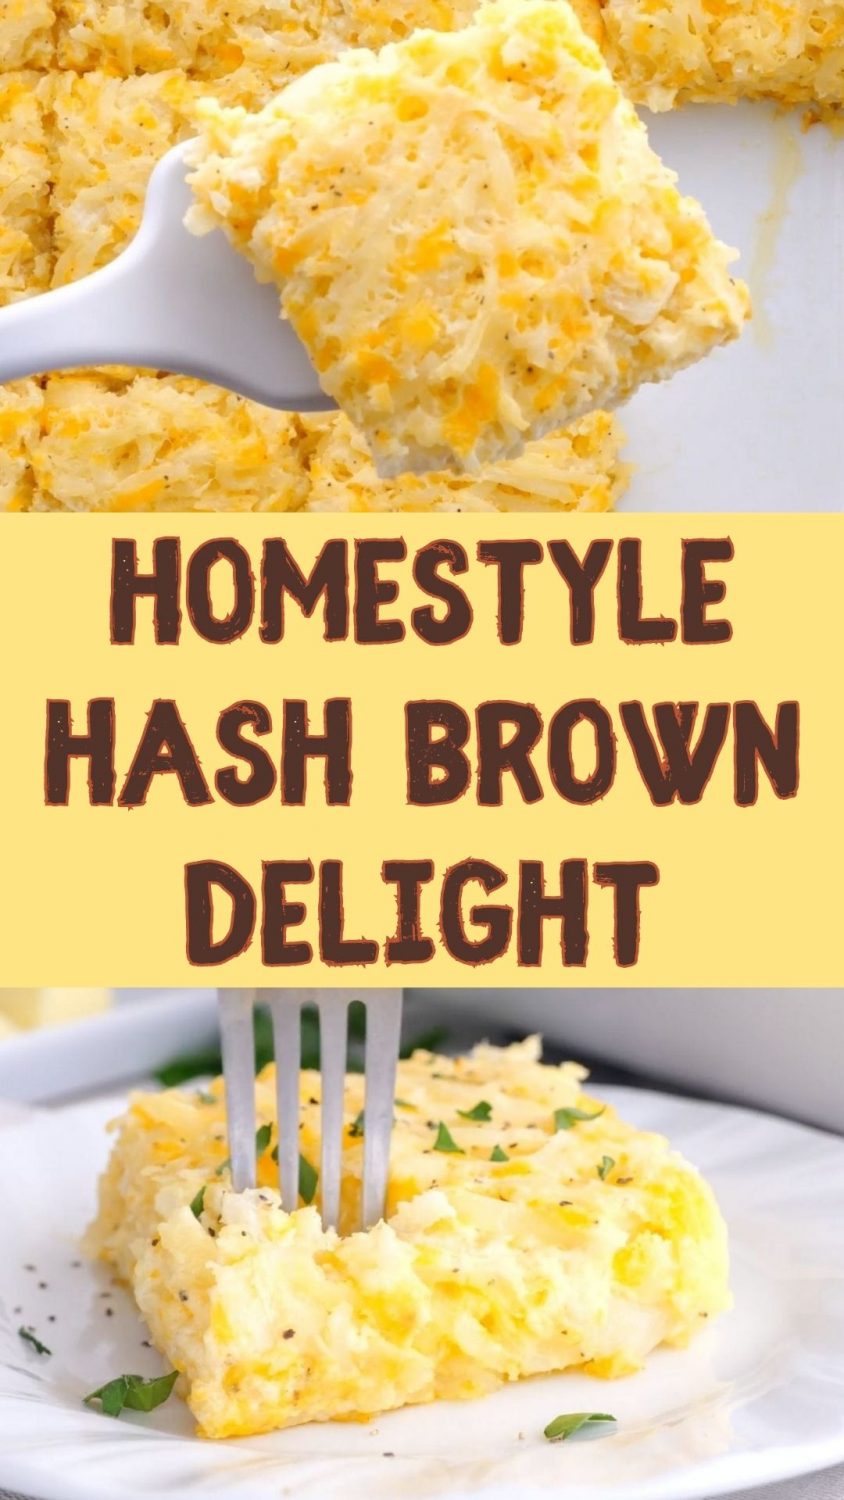 Homestyle Hash Brown Delight